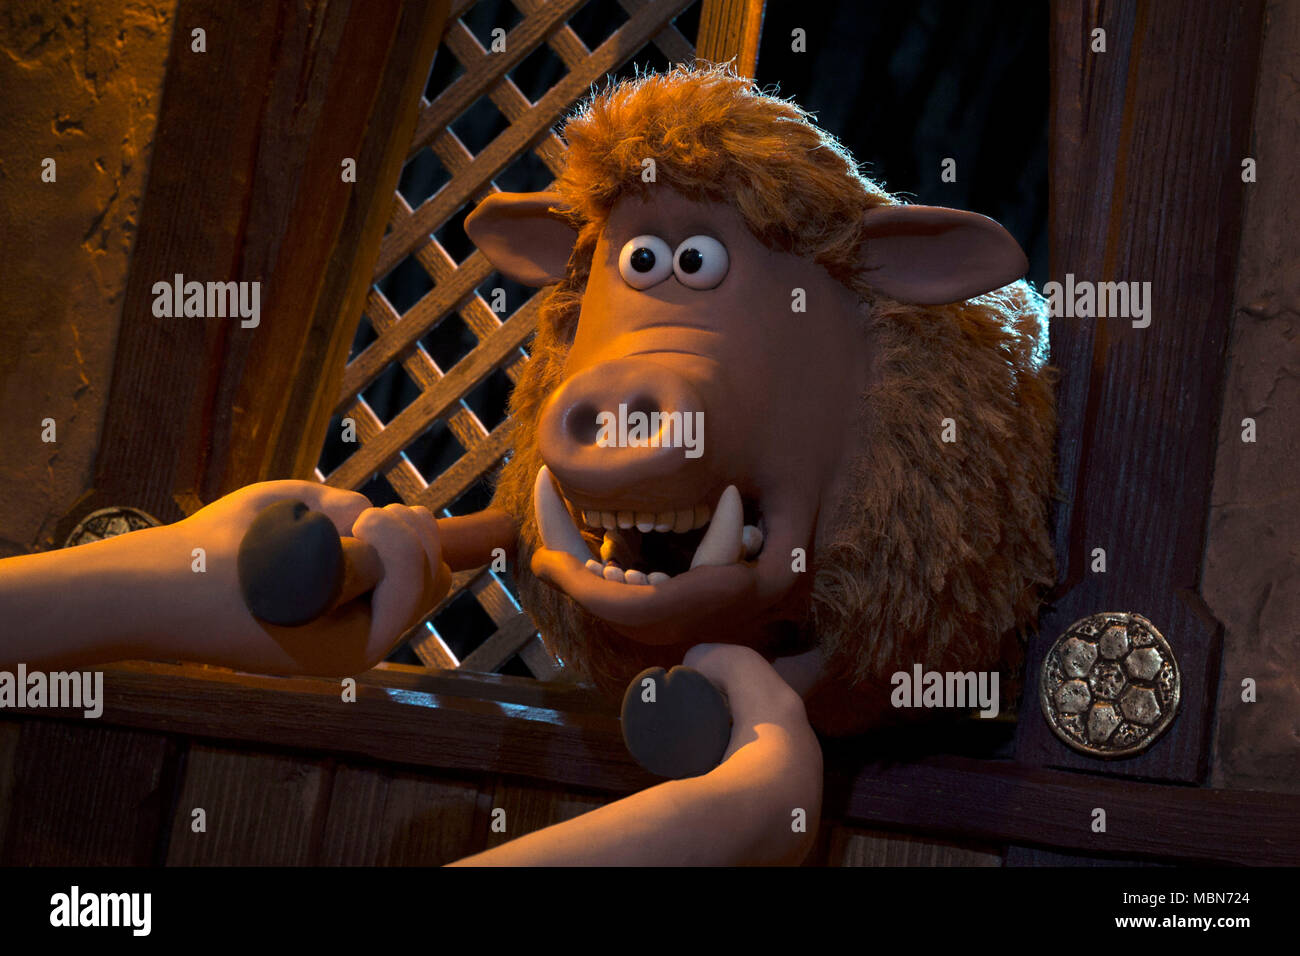 RELEASE DATE: February 16, 2018 TITLE: Early Man STUDIO: Lionsgate DIRECTOR: Nick Park PLOT: Set at the dawn of time, when prehistoric creatures and woolly mammoths roamed the earth, Early Man tells the story of Dug, along with sidekick Hognob as they unite his tribe against a mighty enemy Lord Nooth and his Bronze Age City to save their home. STARRING: Tom Hiddleston, Eddie Redmayne, Maisie Williams. (Credit Image: © Lionsgate/Entertainment Pictures) Stock Photo